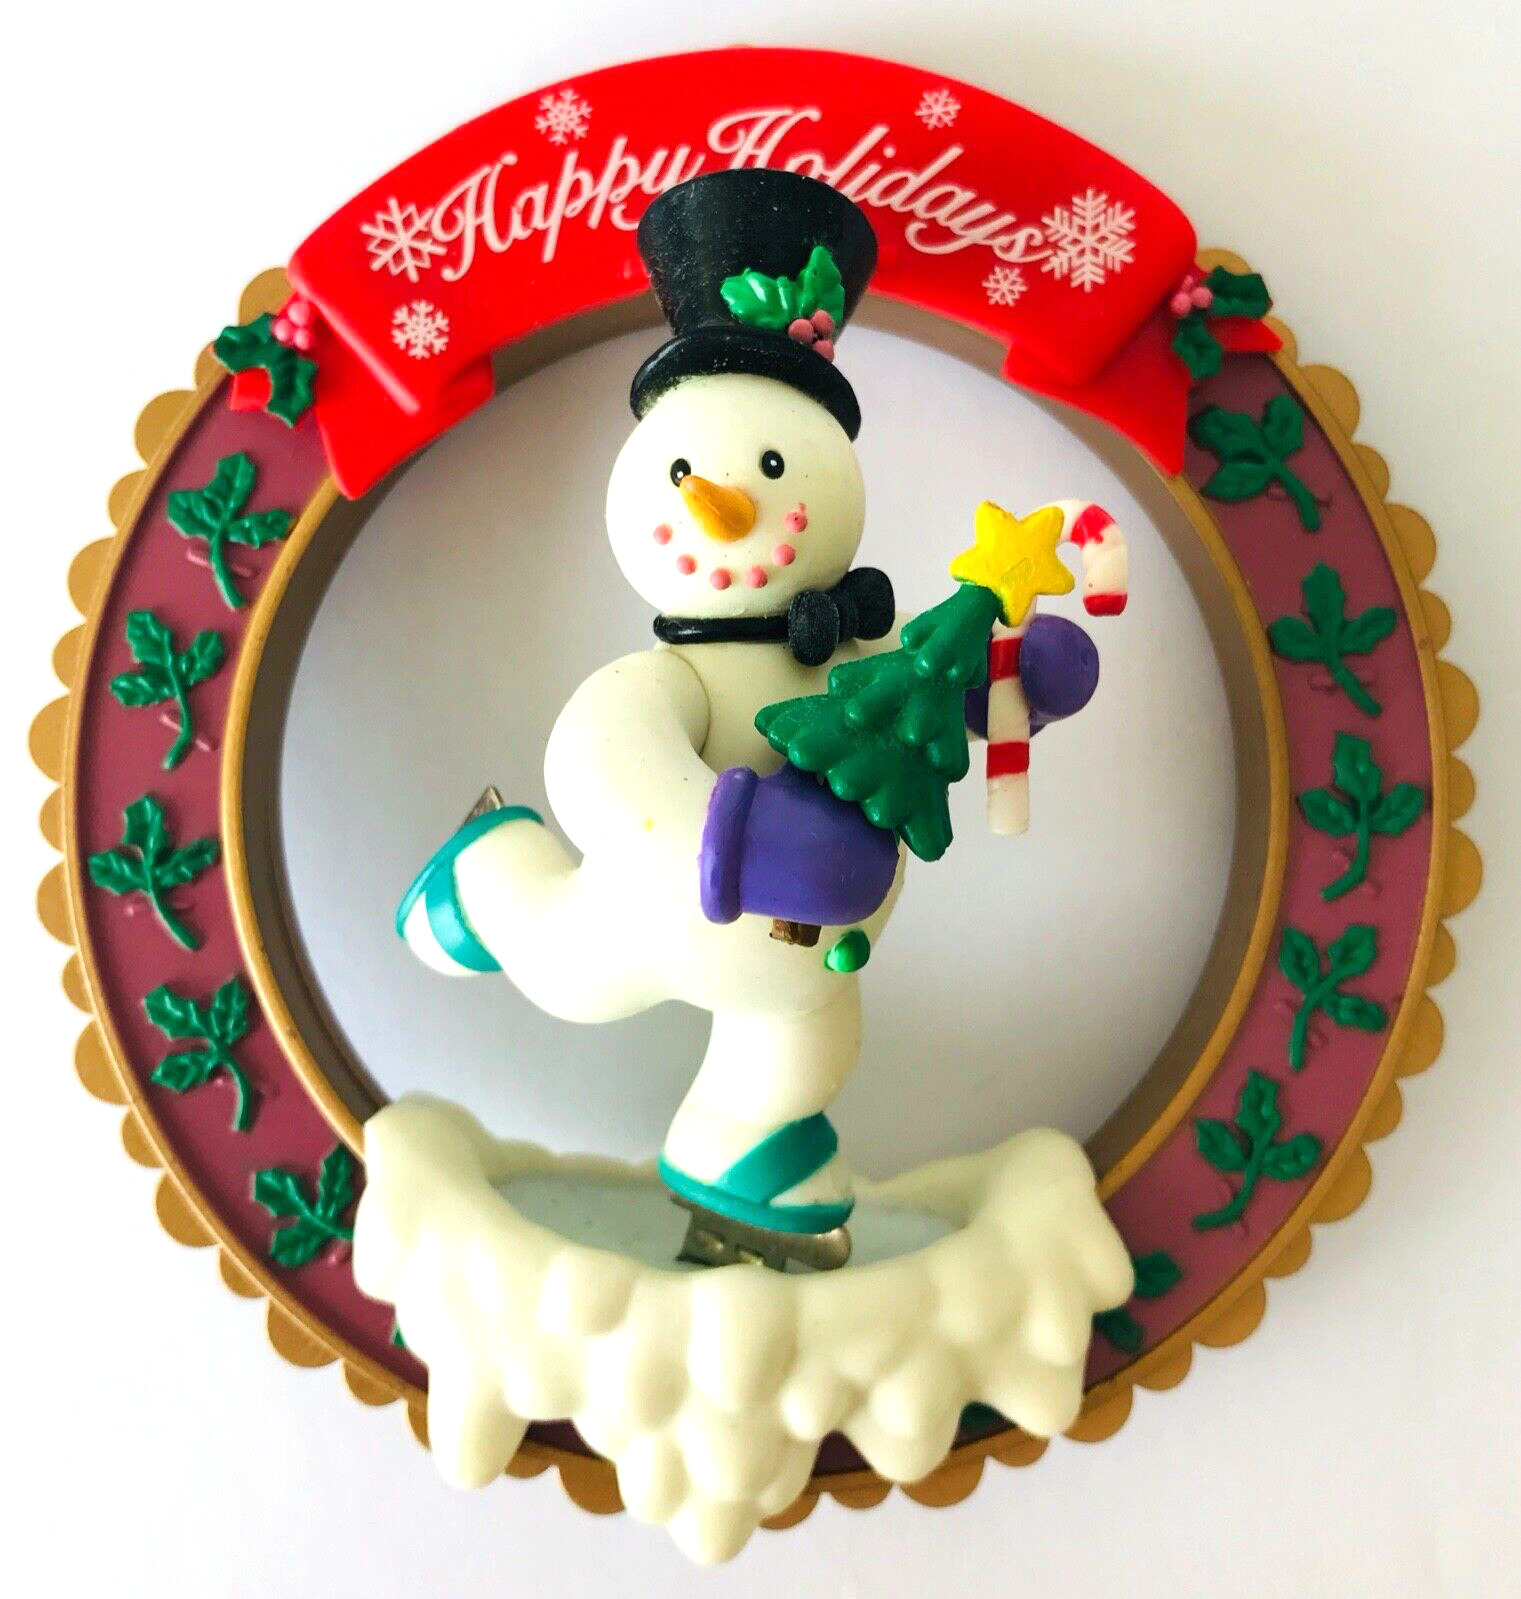 Skating Snowman Christmas Ornament 1998 Happy Holidays Limited Edition in Box